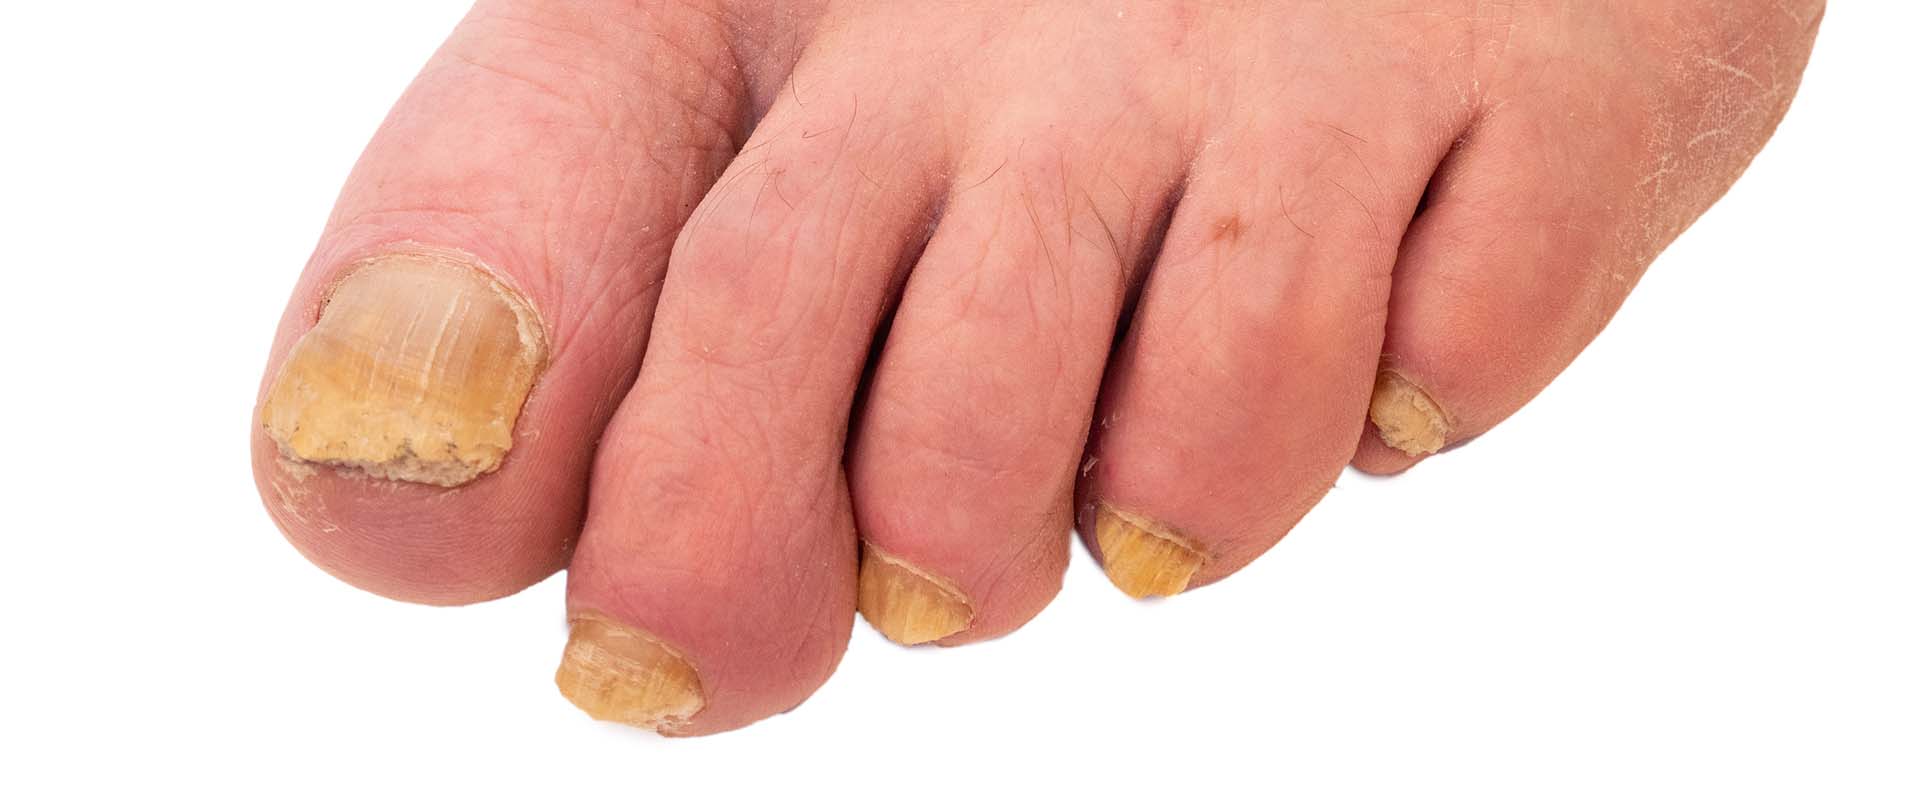 Fungal Nails Treatment Melbourne | Your Foot Clinic Podiatry